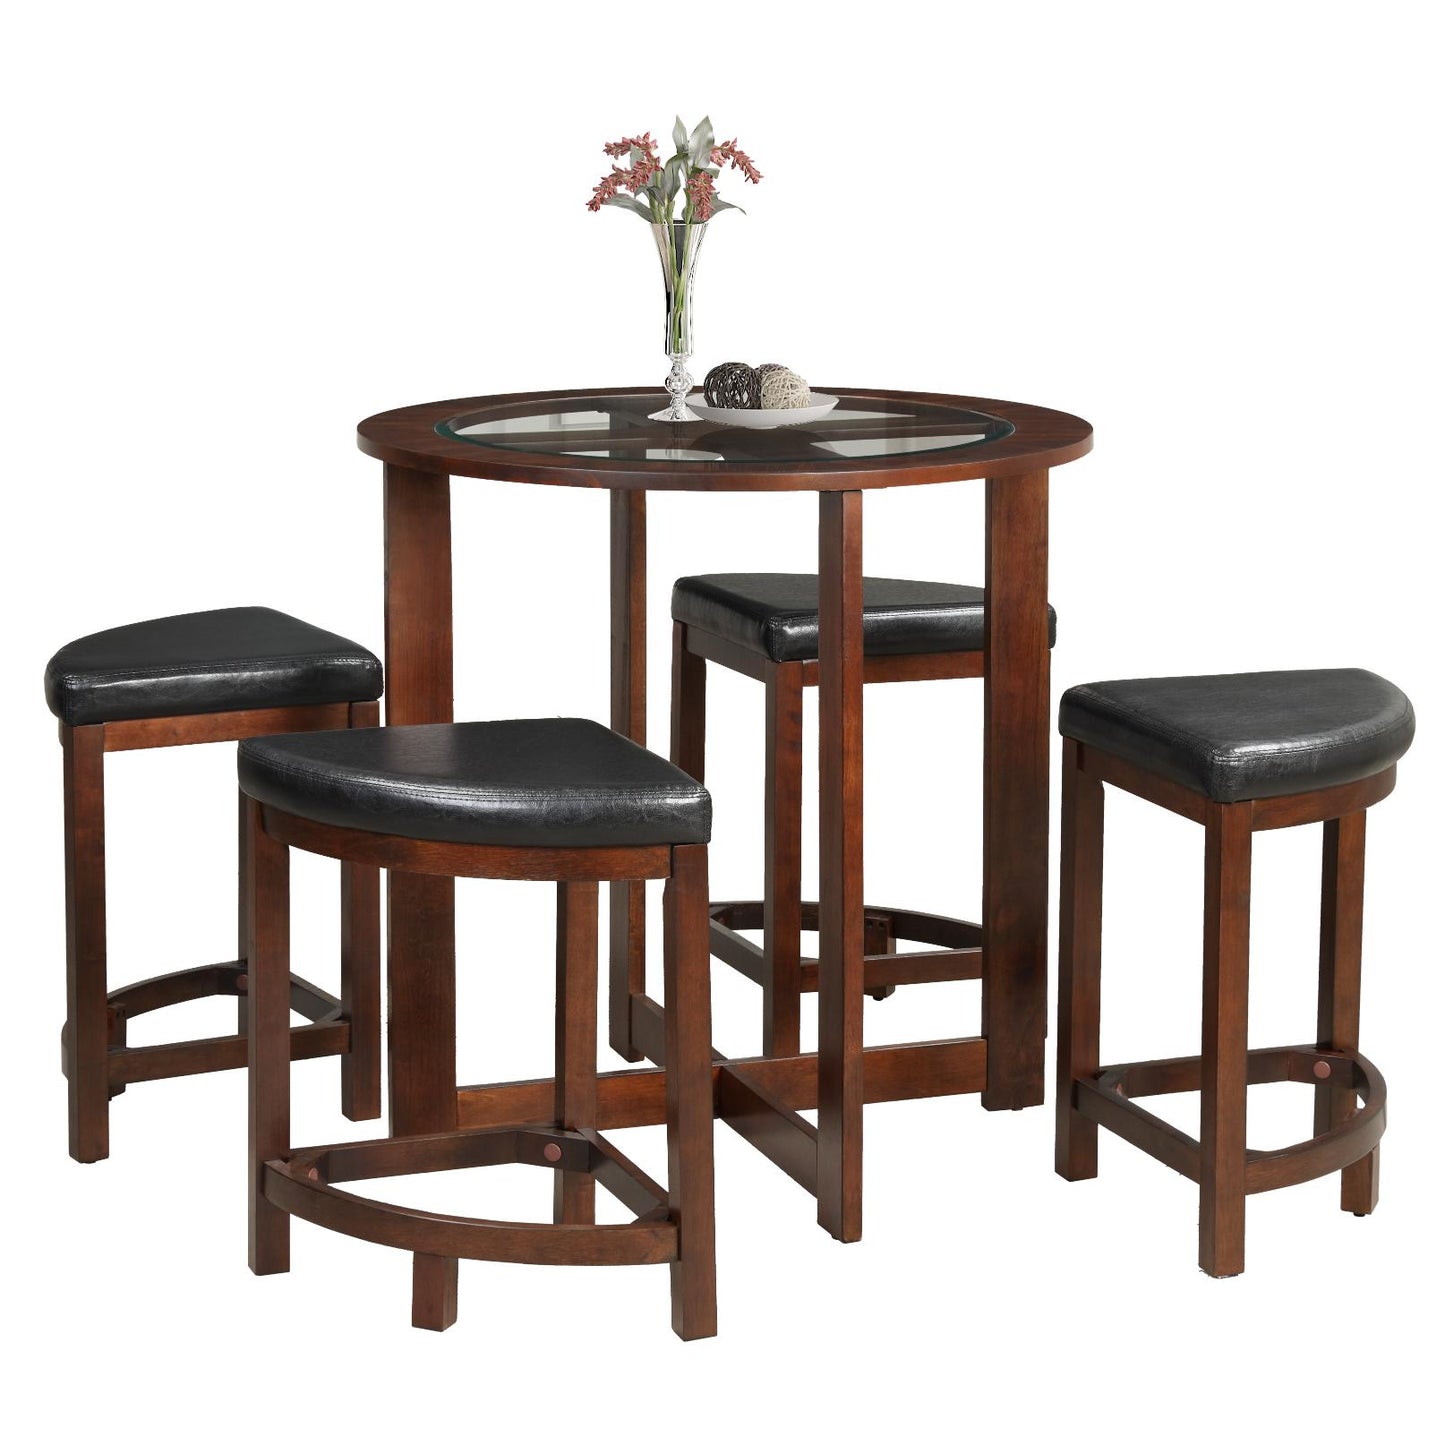 Solid Wood Glass Top Counter Height Table w/ 4 Stools